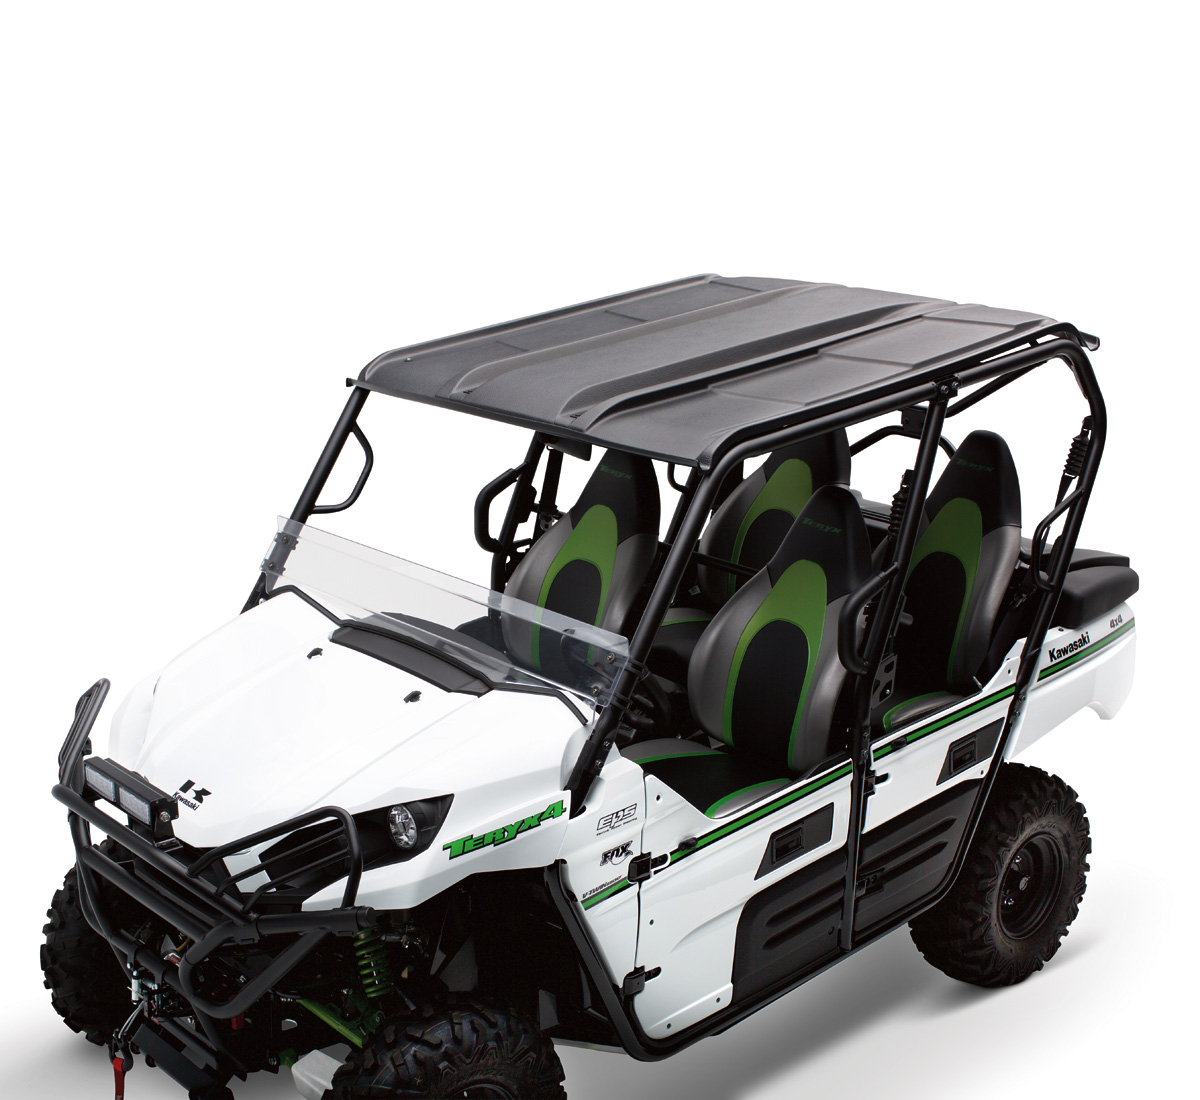 Fortolke Knurre Hejse Parts & Accessories Other OEM KAWASAKI TERYX 2 SEATER Cargo Bed Divider  TX000-07 greatrace.com